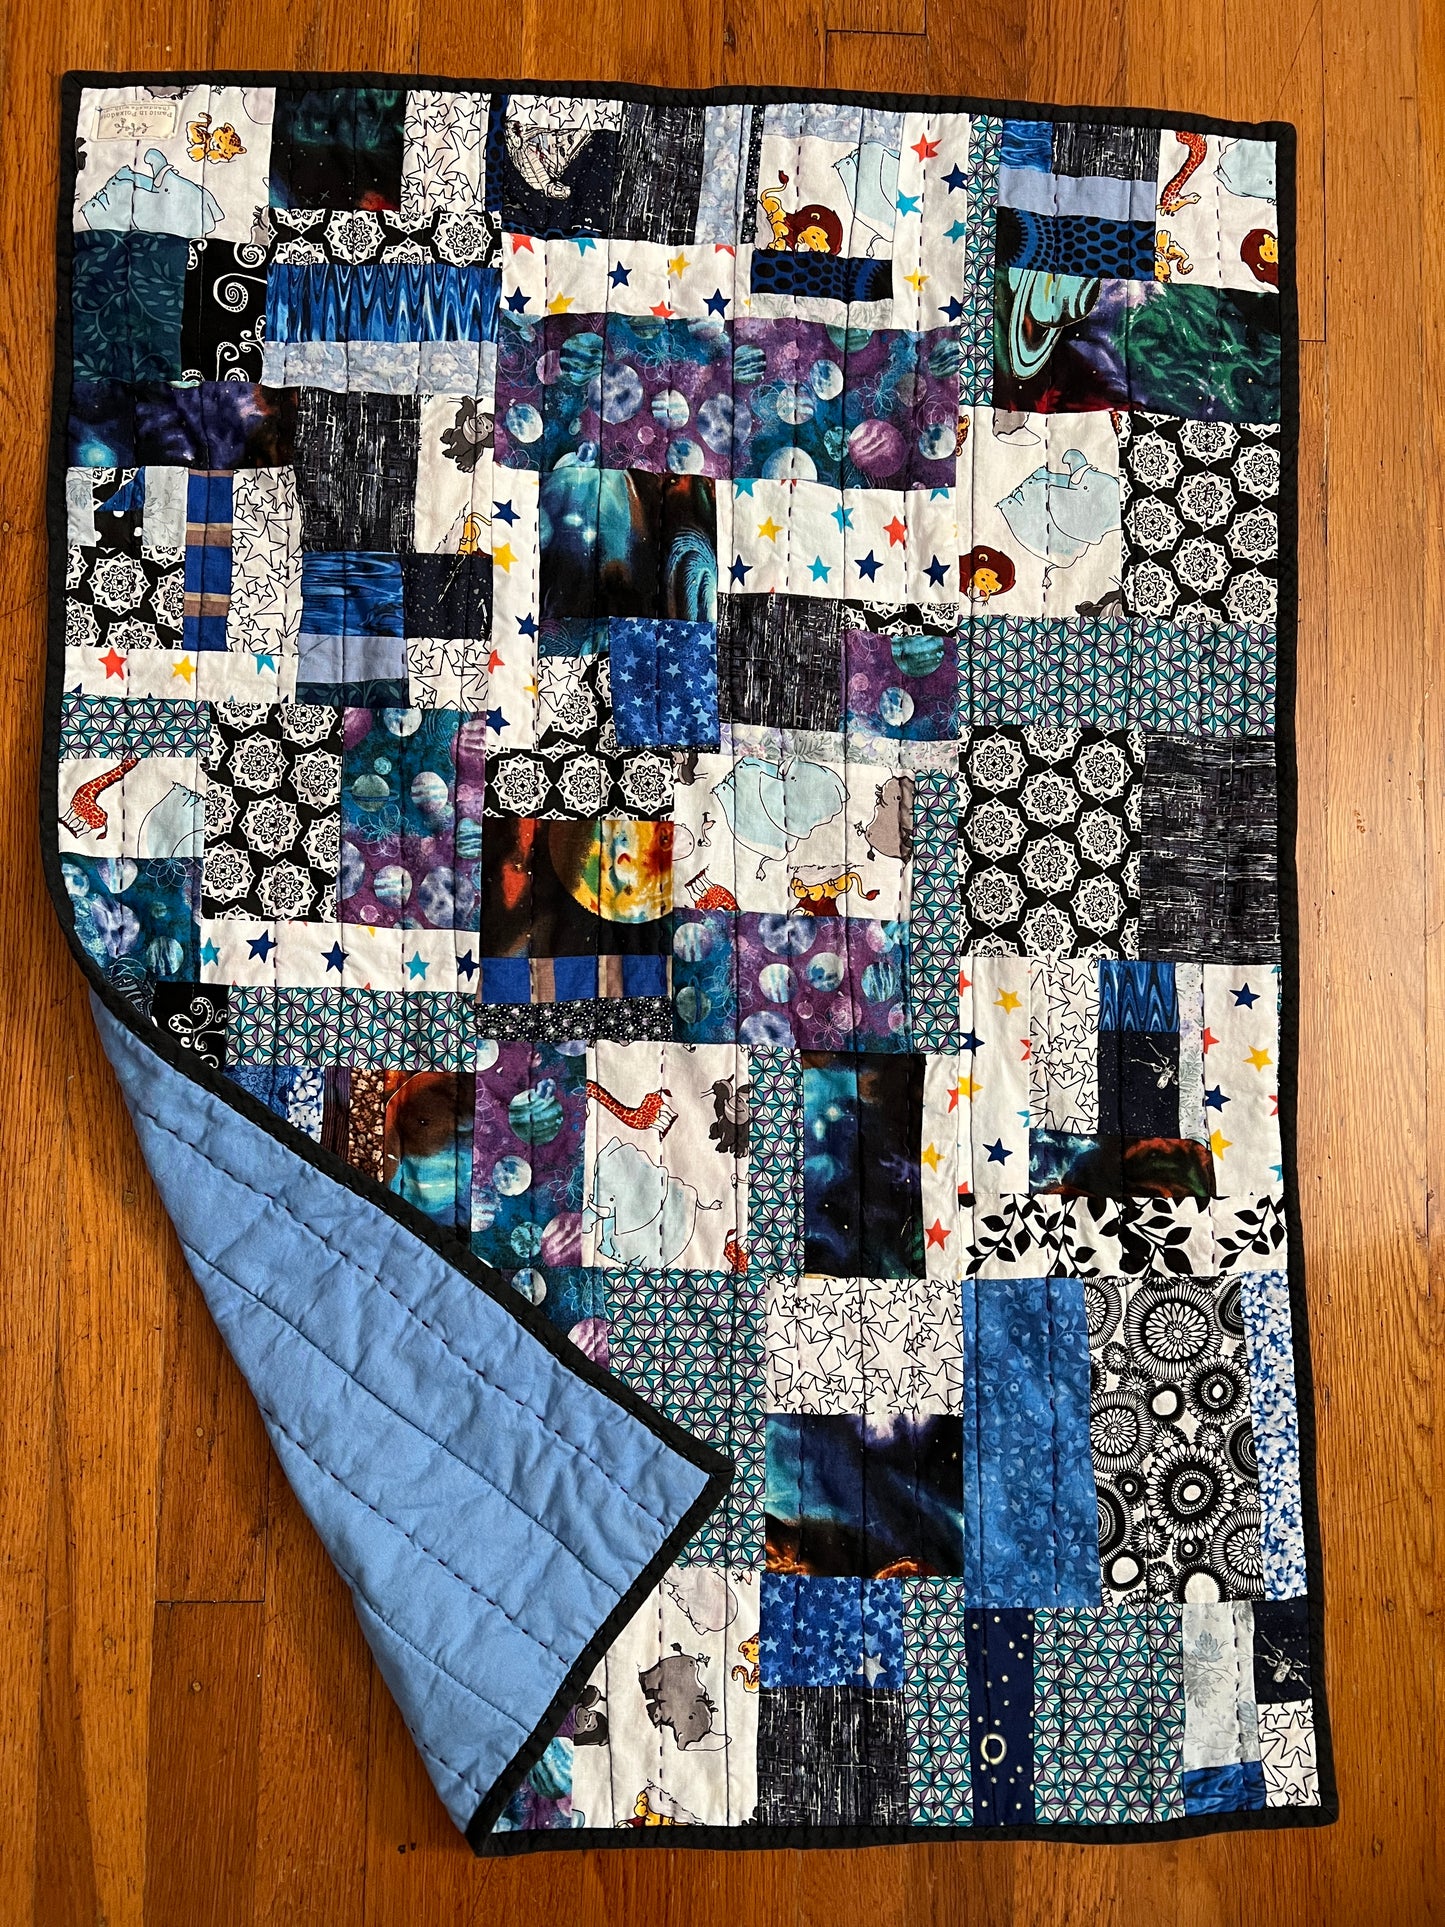 Small Quilt - Baby Blanket - Pet Quilt for Dogs or Cats - Hand-quilted Detail - Scrappy Quilt Art